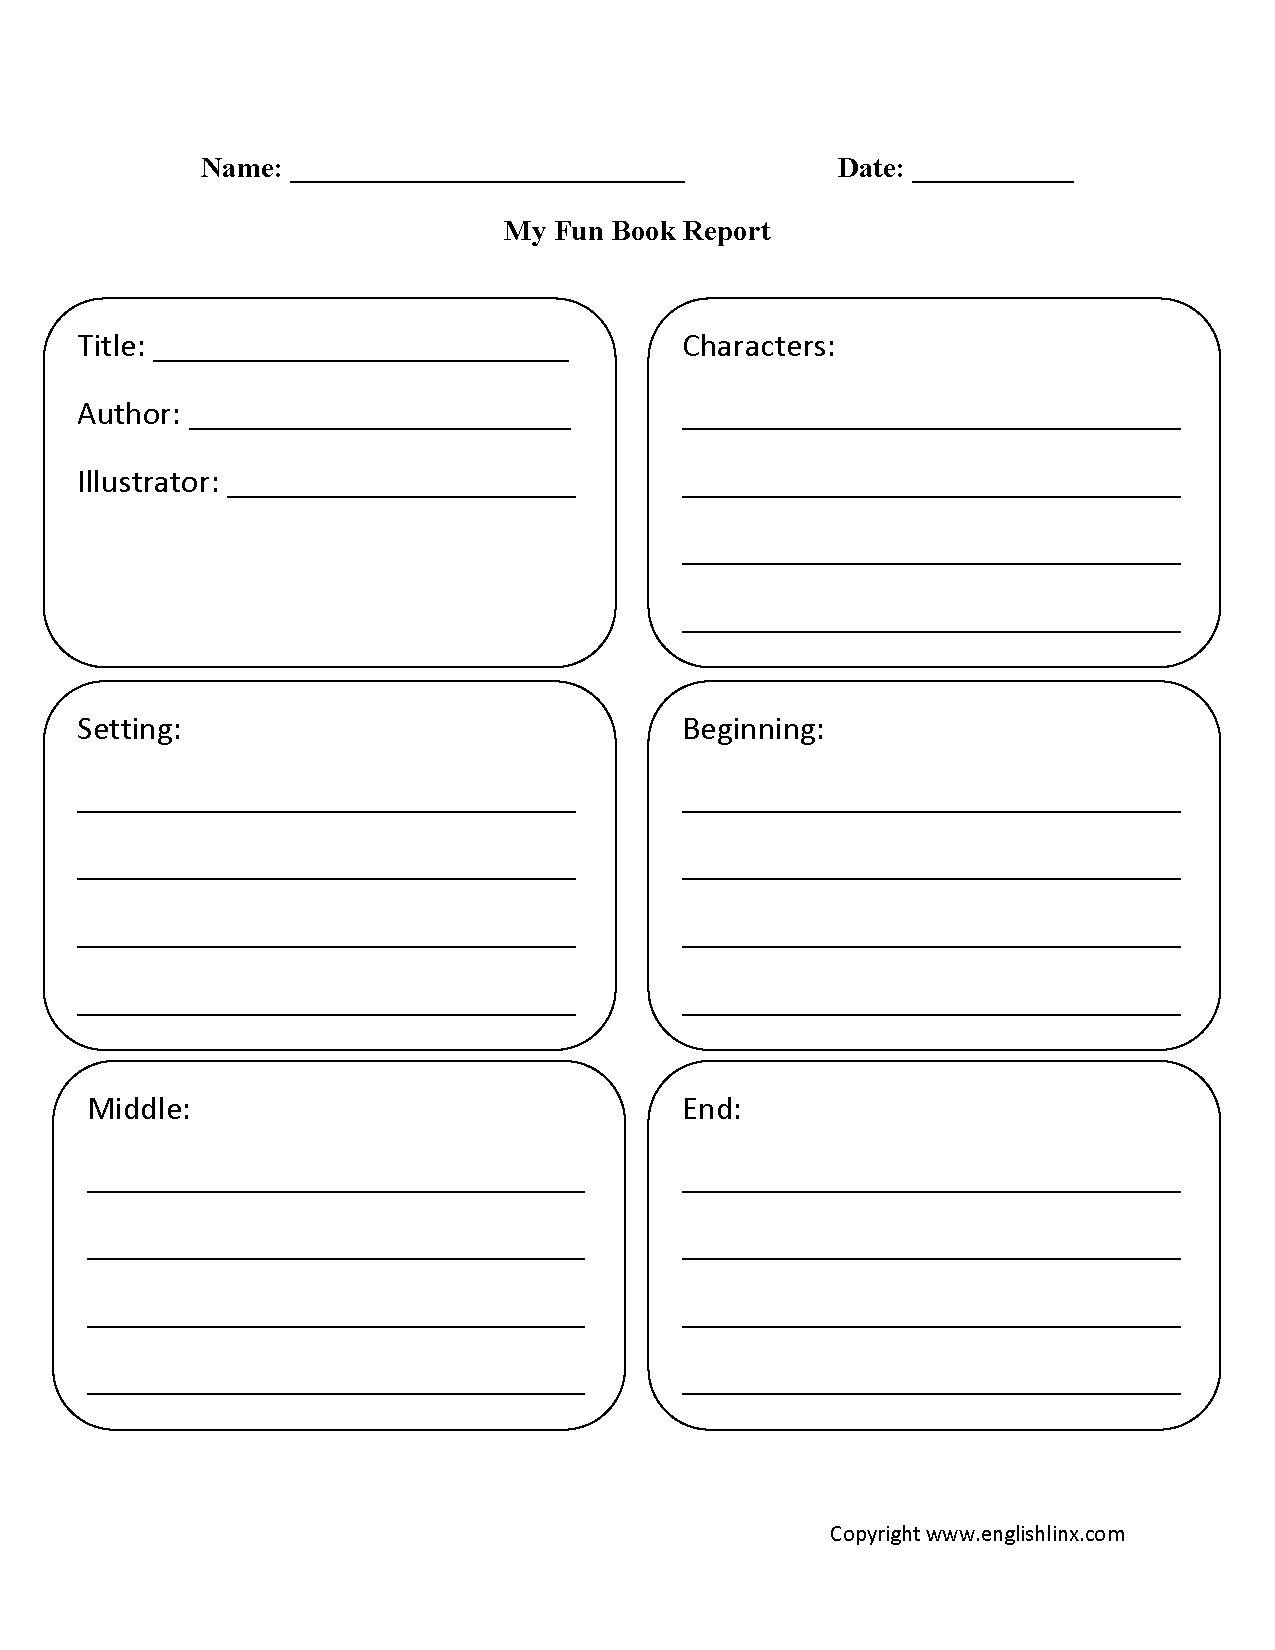 011 Biography Book Report Template Ideas My Formidable 3Rd Throughout Book Report Template 3Rd Grade